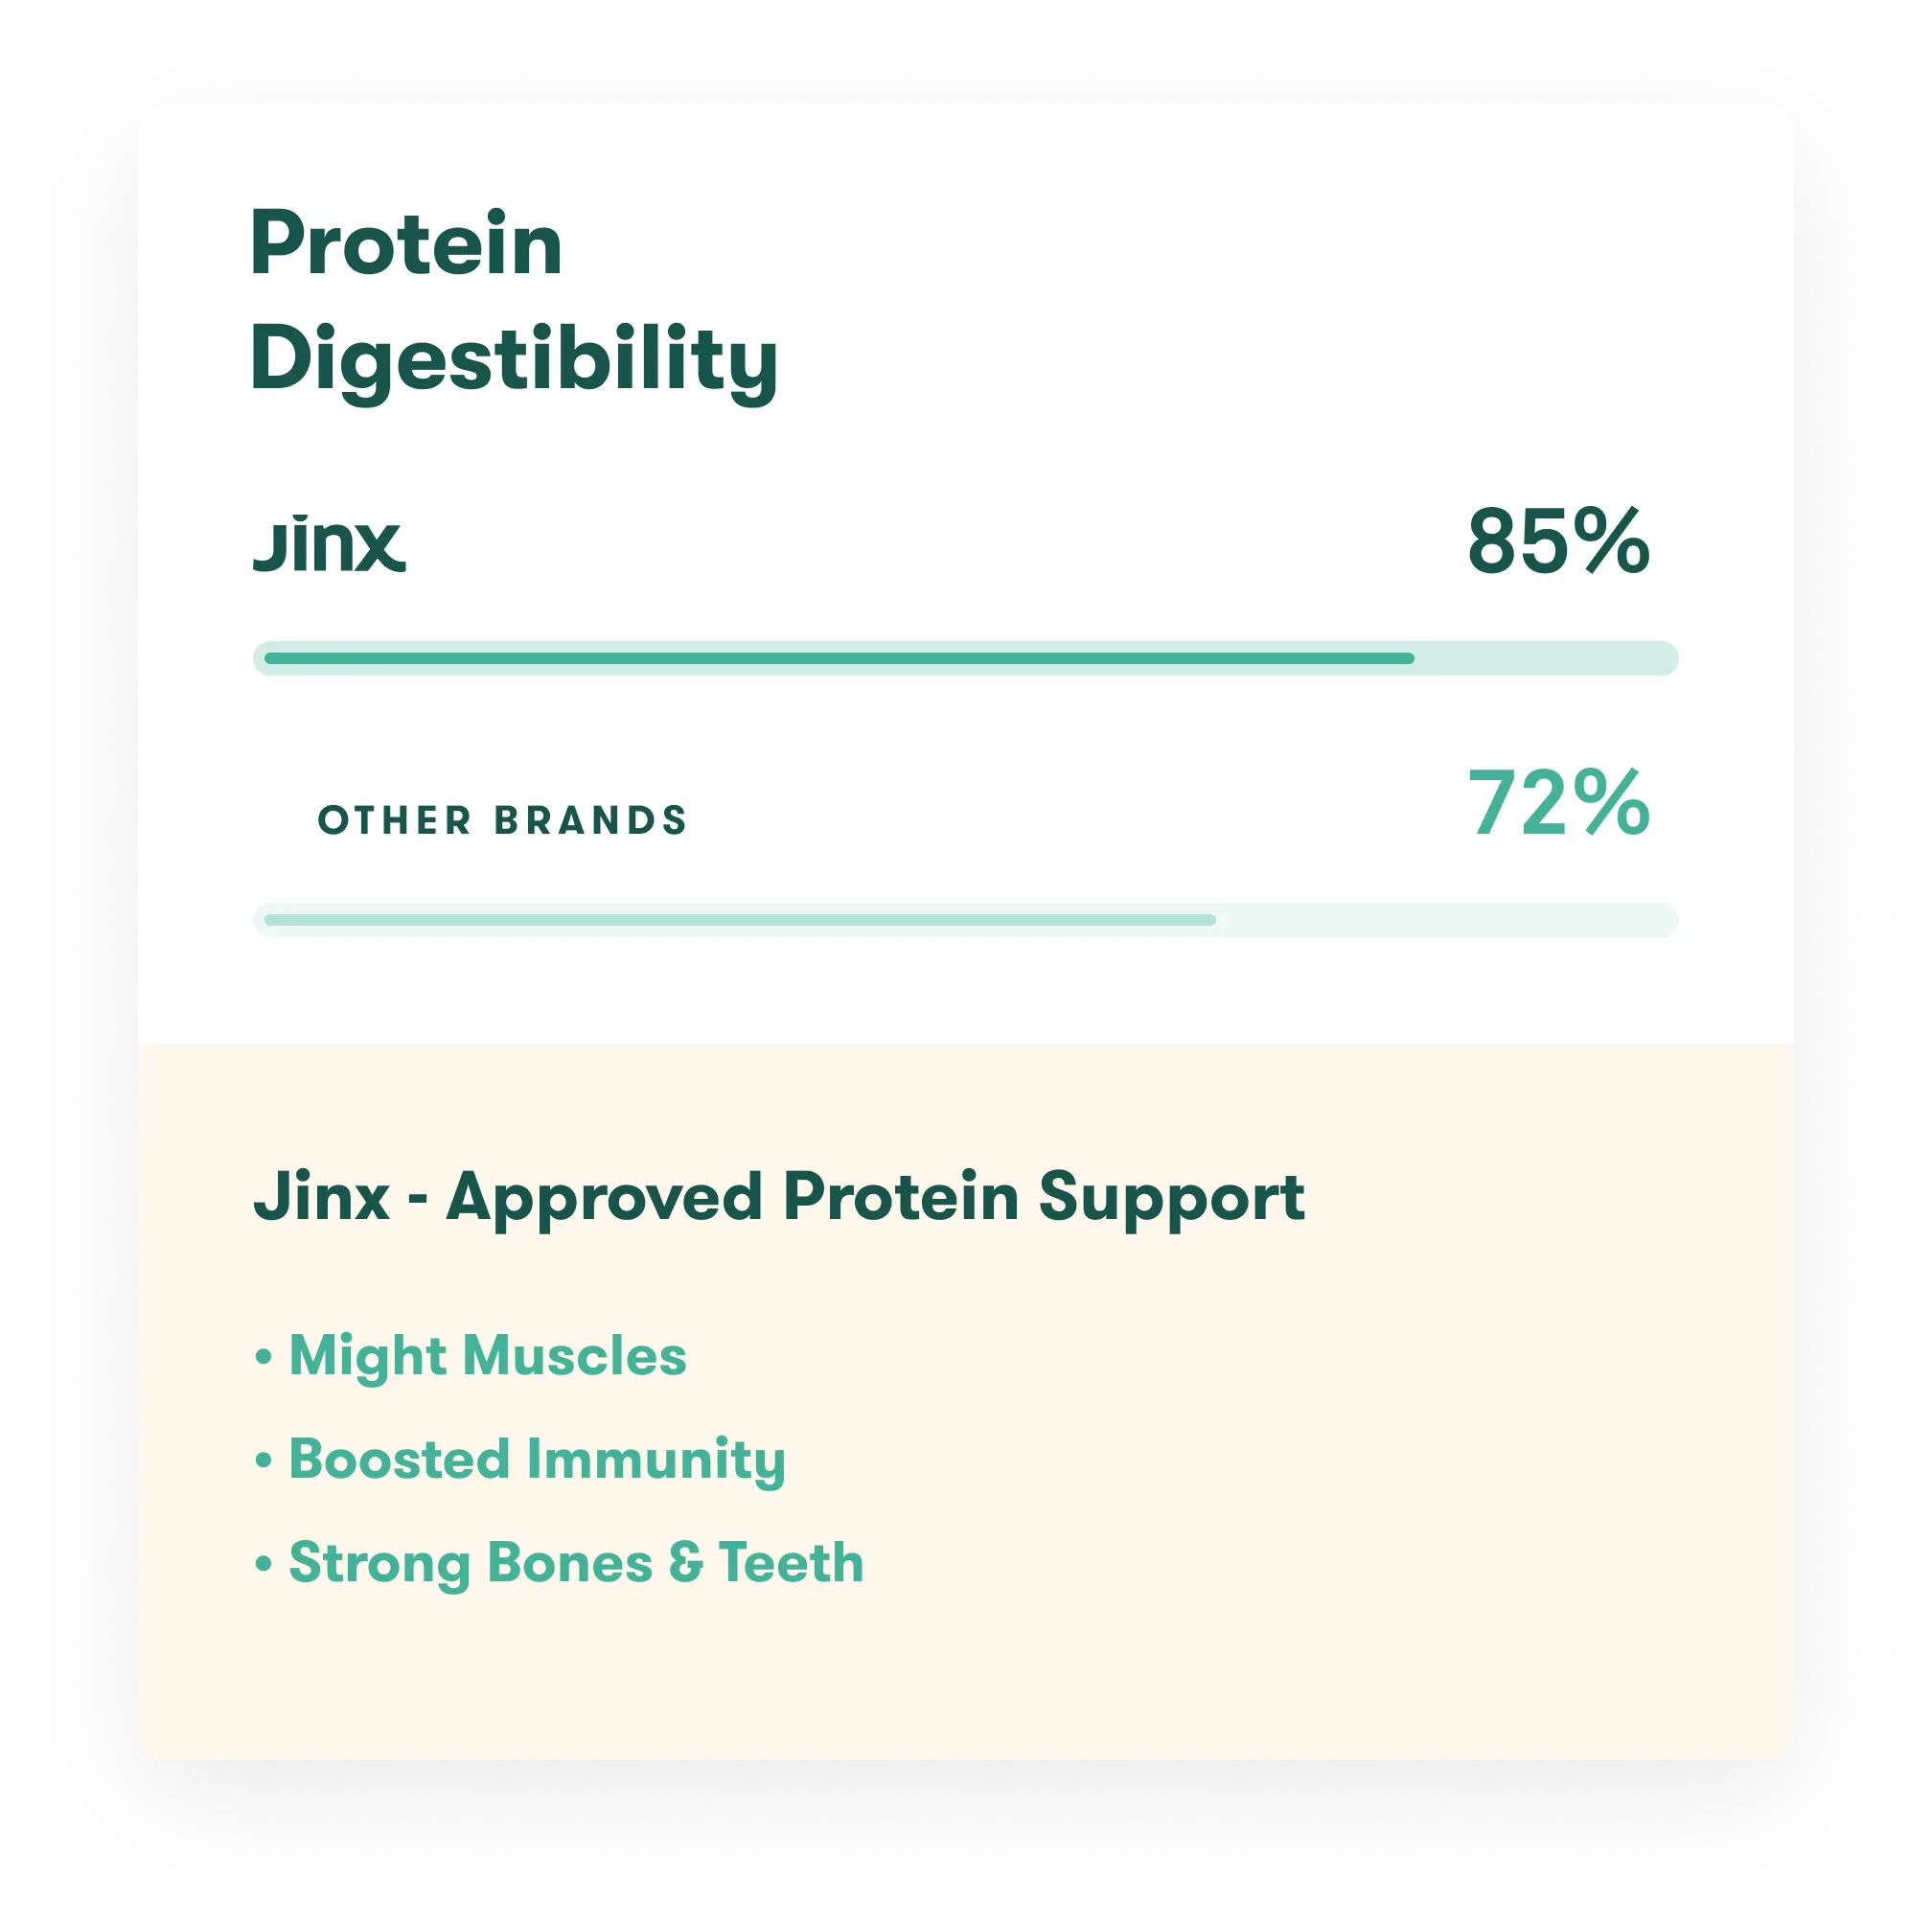 Protein digestibility graph with Jinx at 85% and other brands at 72% 